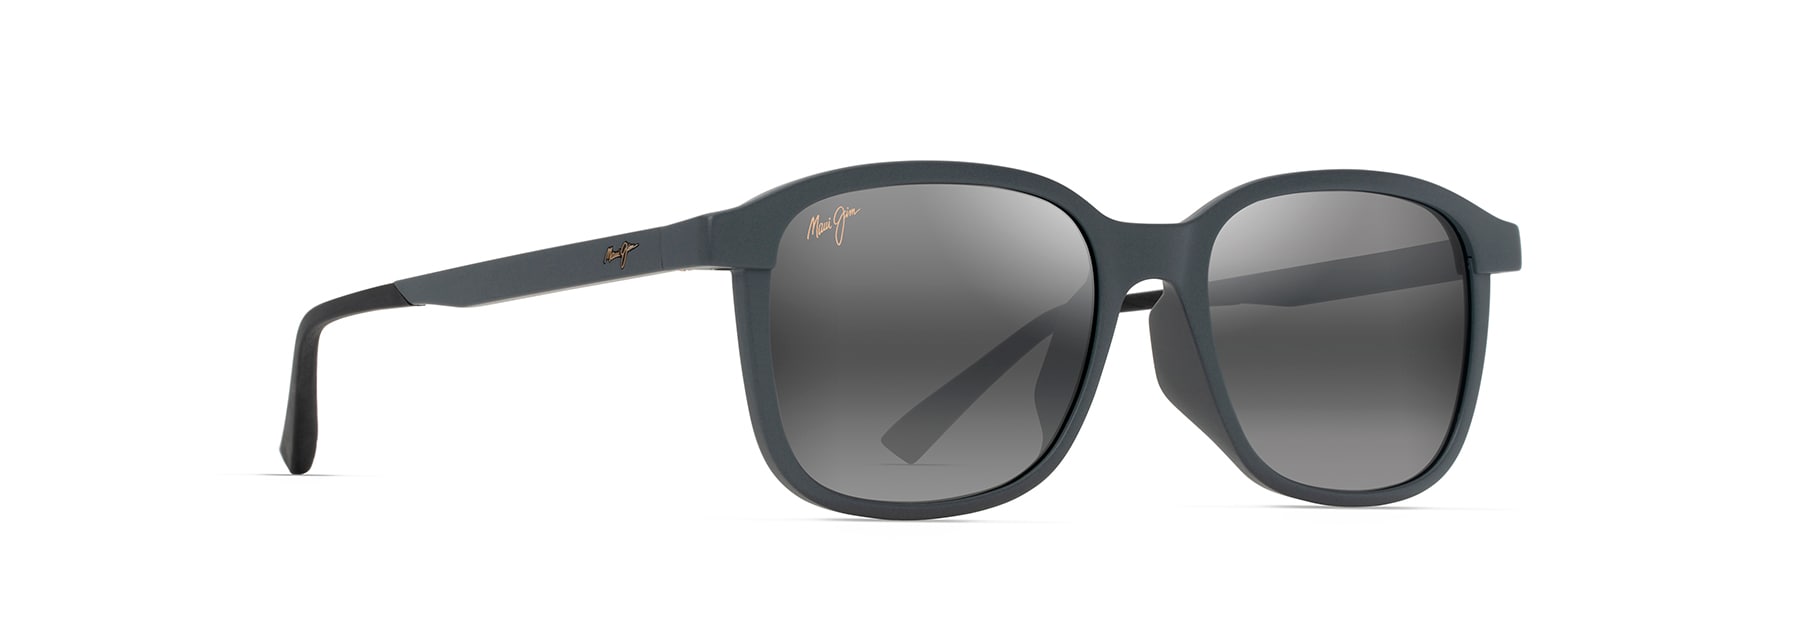 What Are Asian Fit Sunglasses?